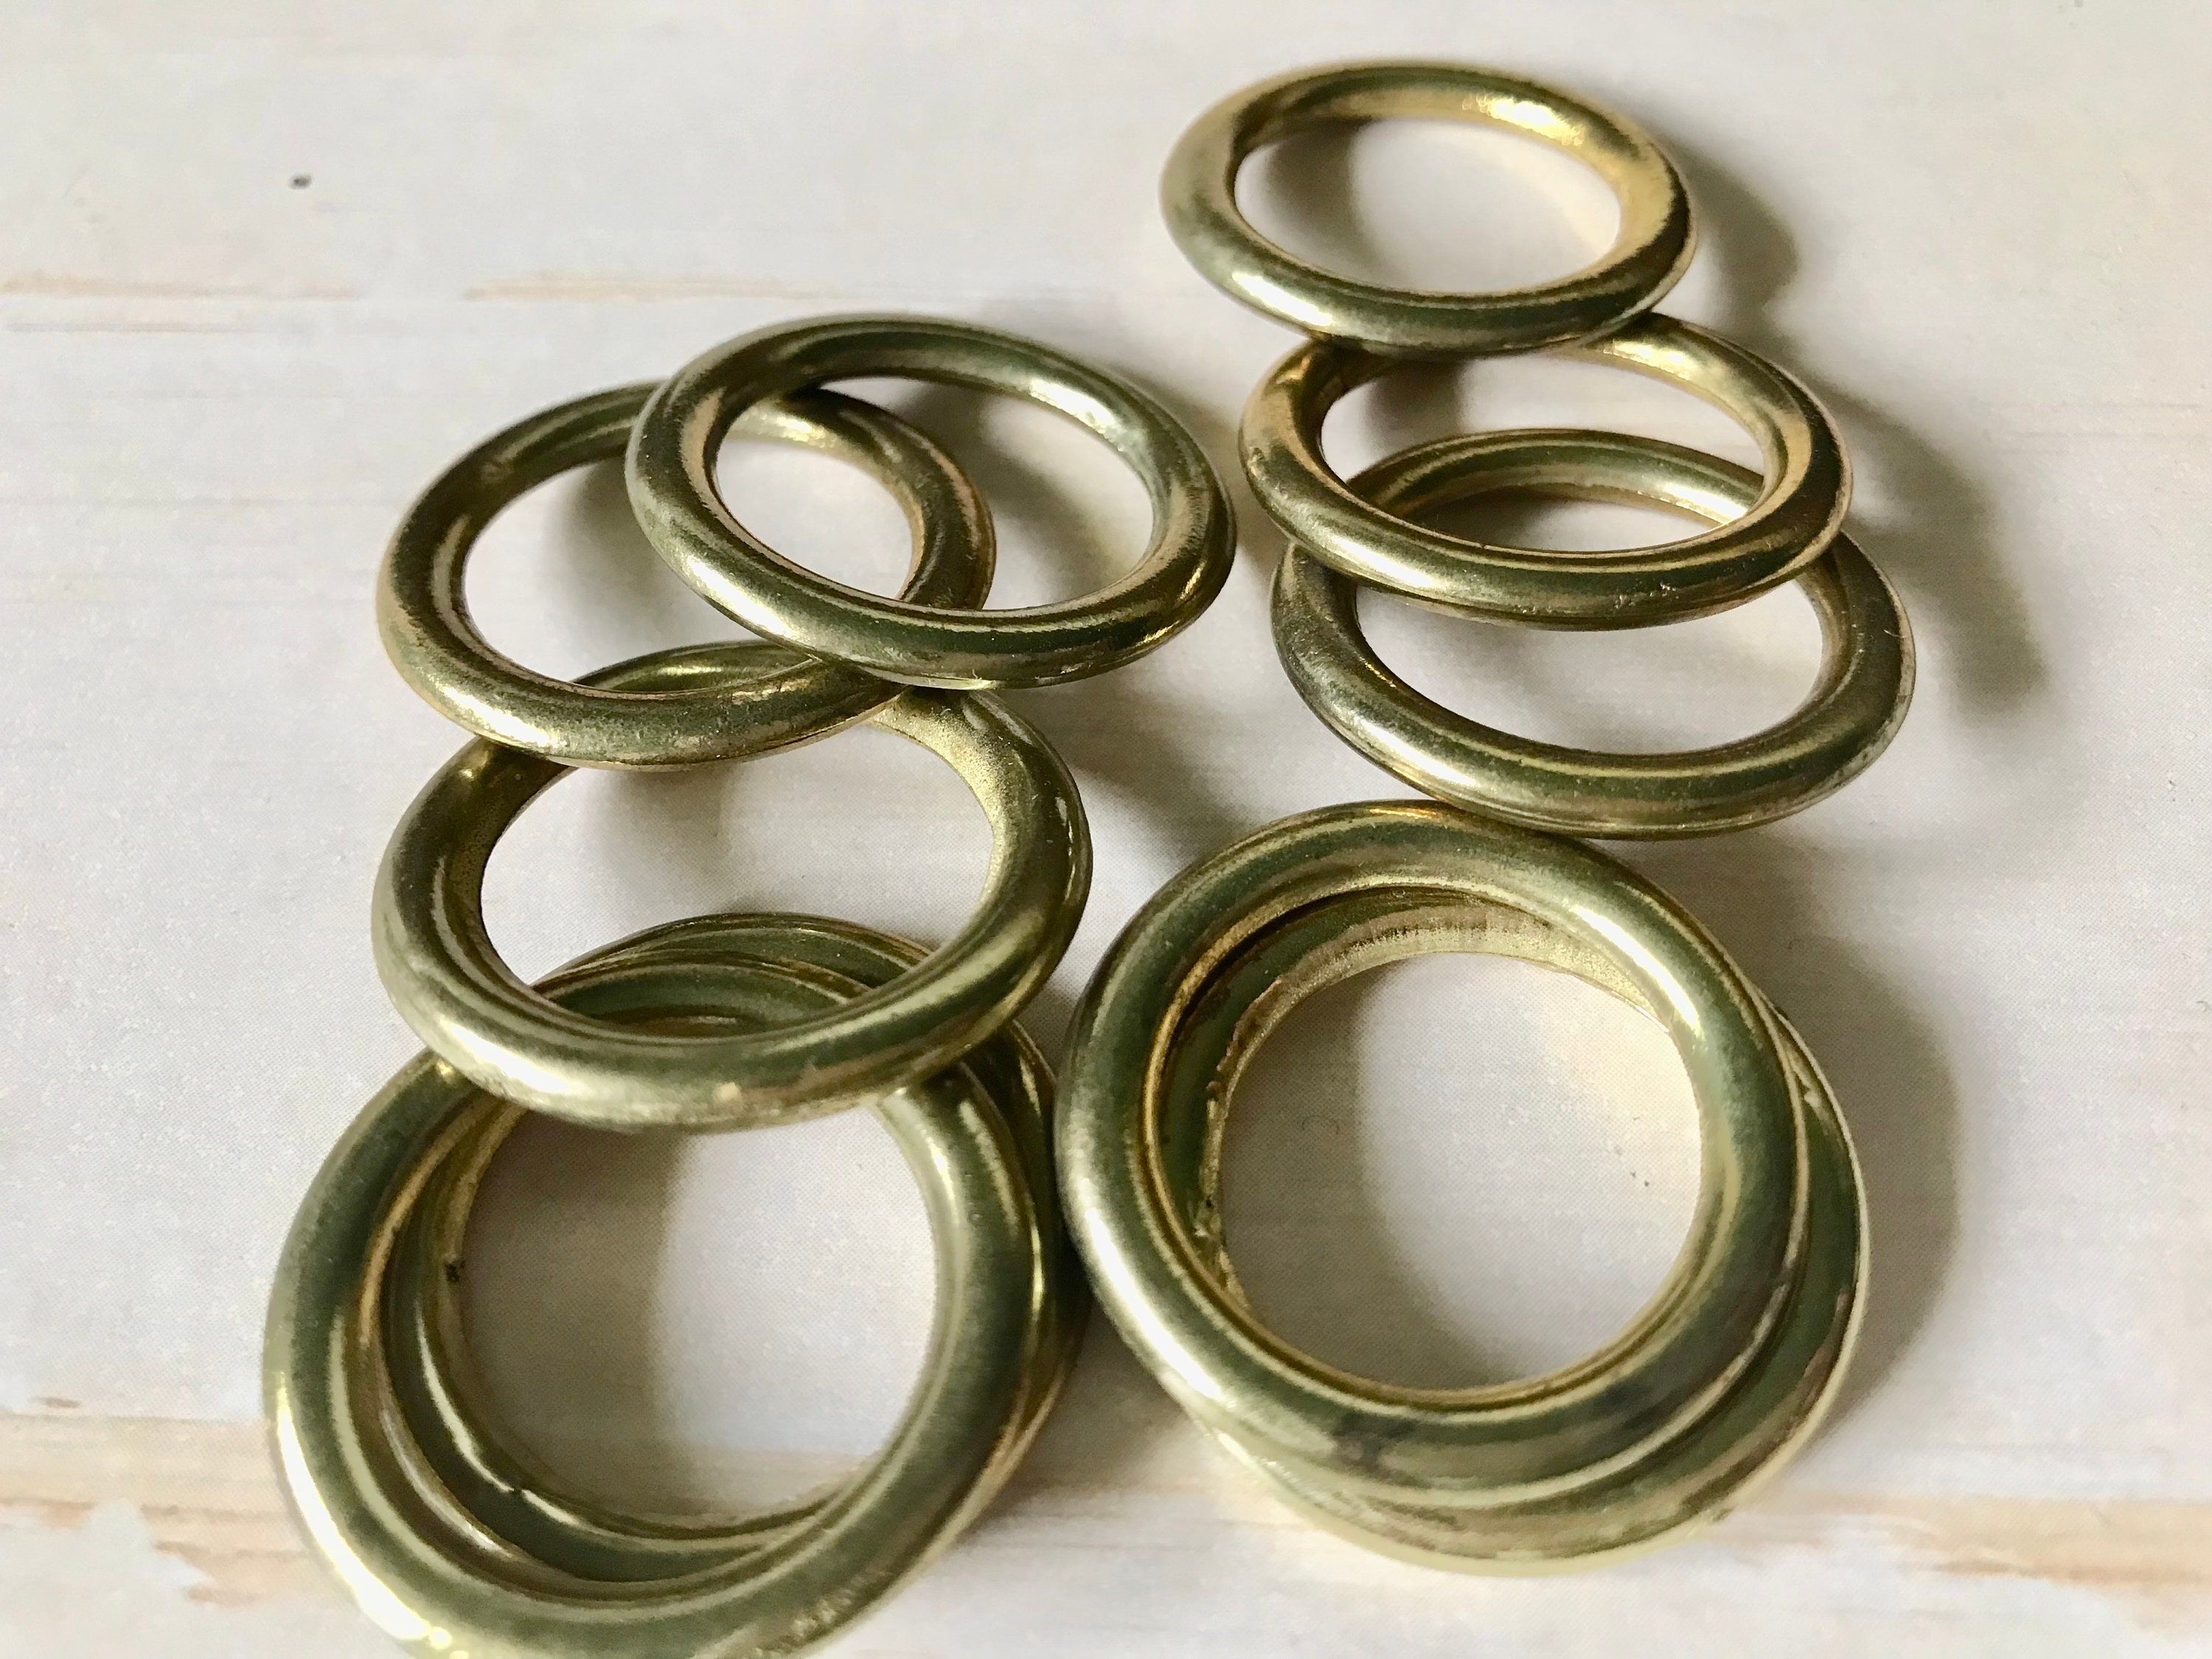 16 Curtain Spacers, Grommet Spacers, Drapes Spacers, Curtain Shapers,  Curtain Accessories, Pleats. Set of 16 2 Spacers. 